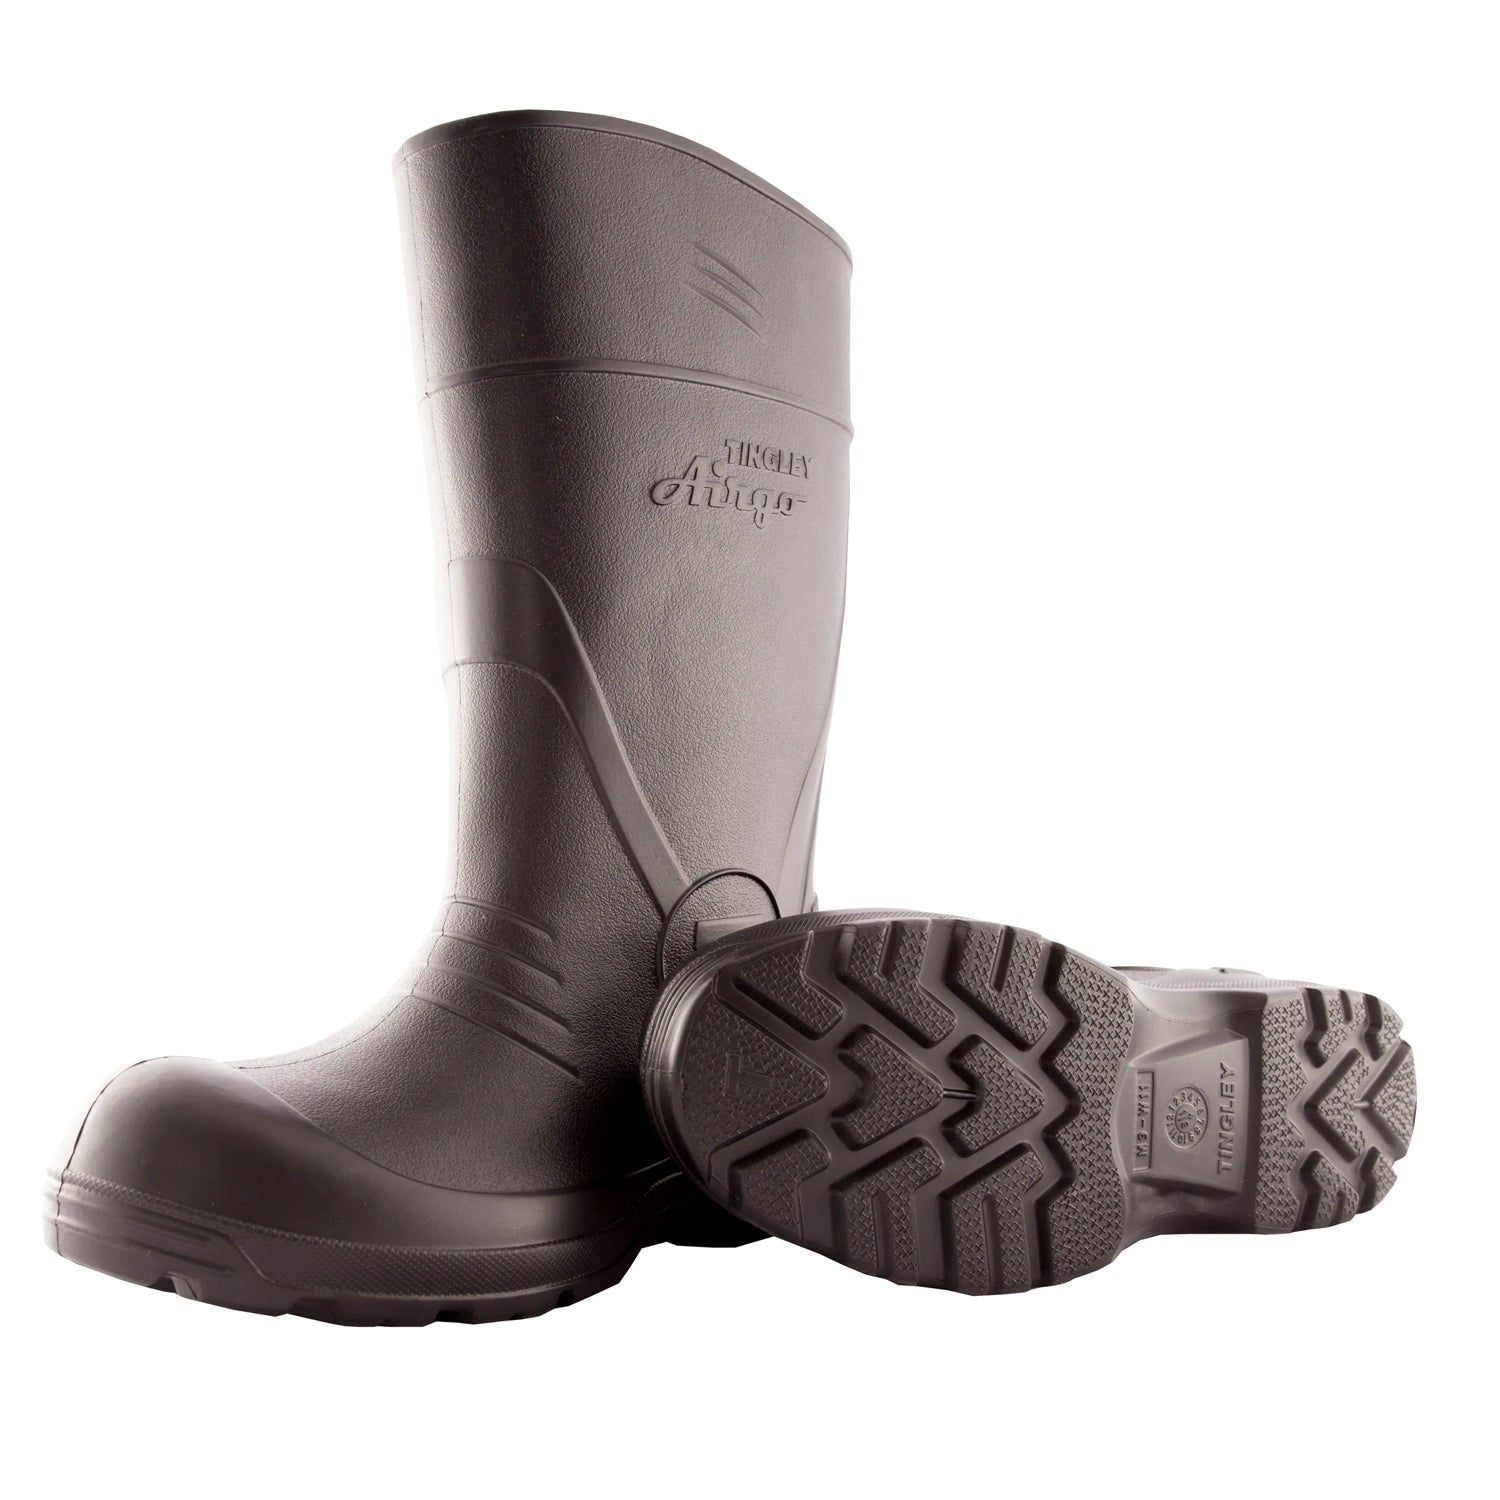 Boots from Ultralight Collection